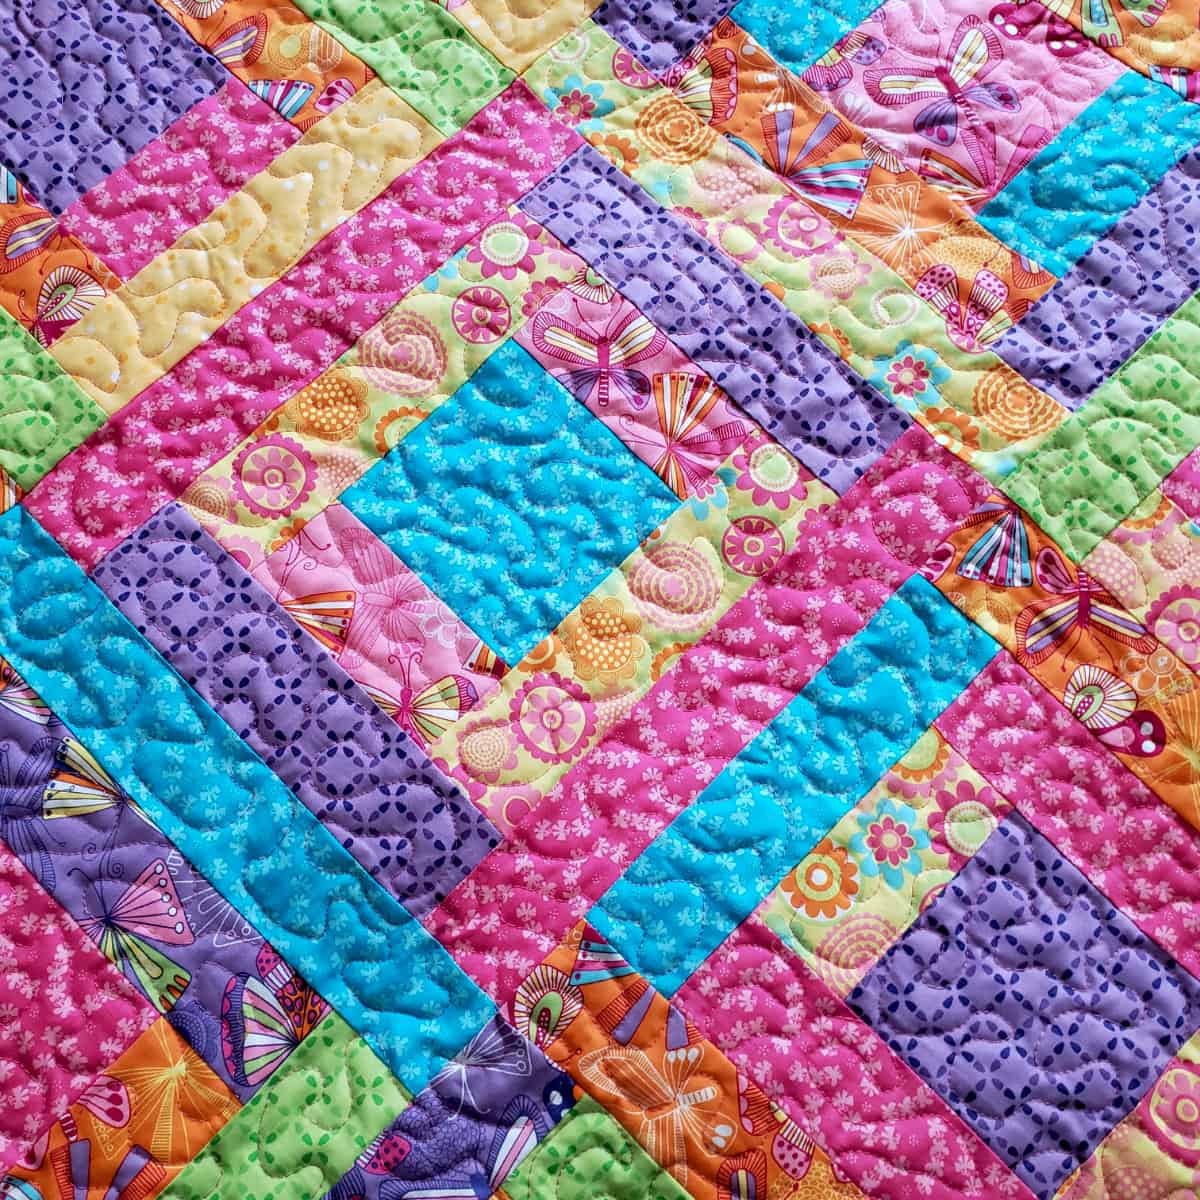 closeup of the stitching on the baby quilt